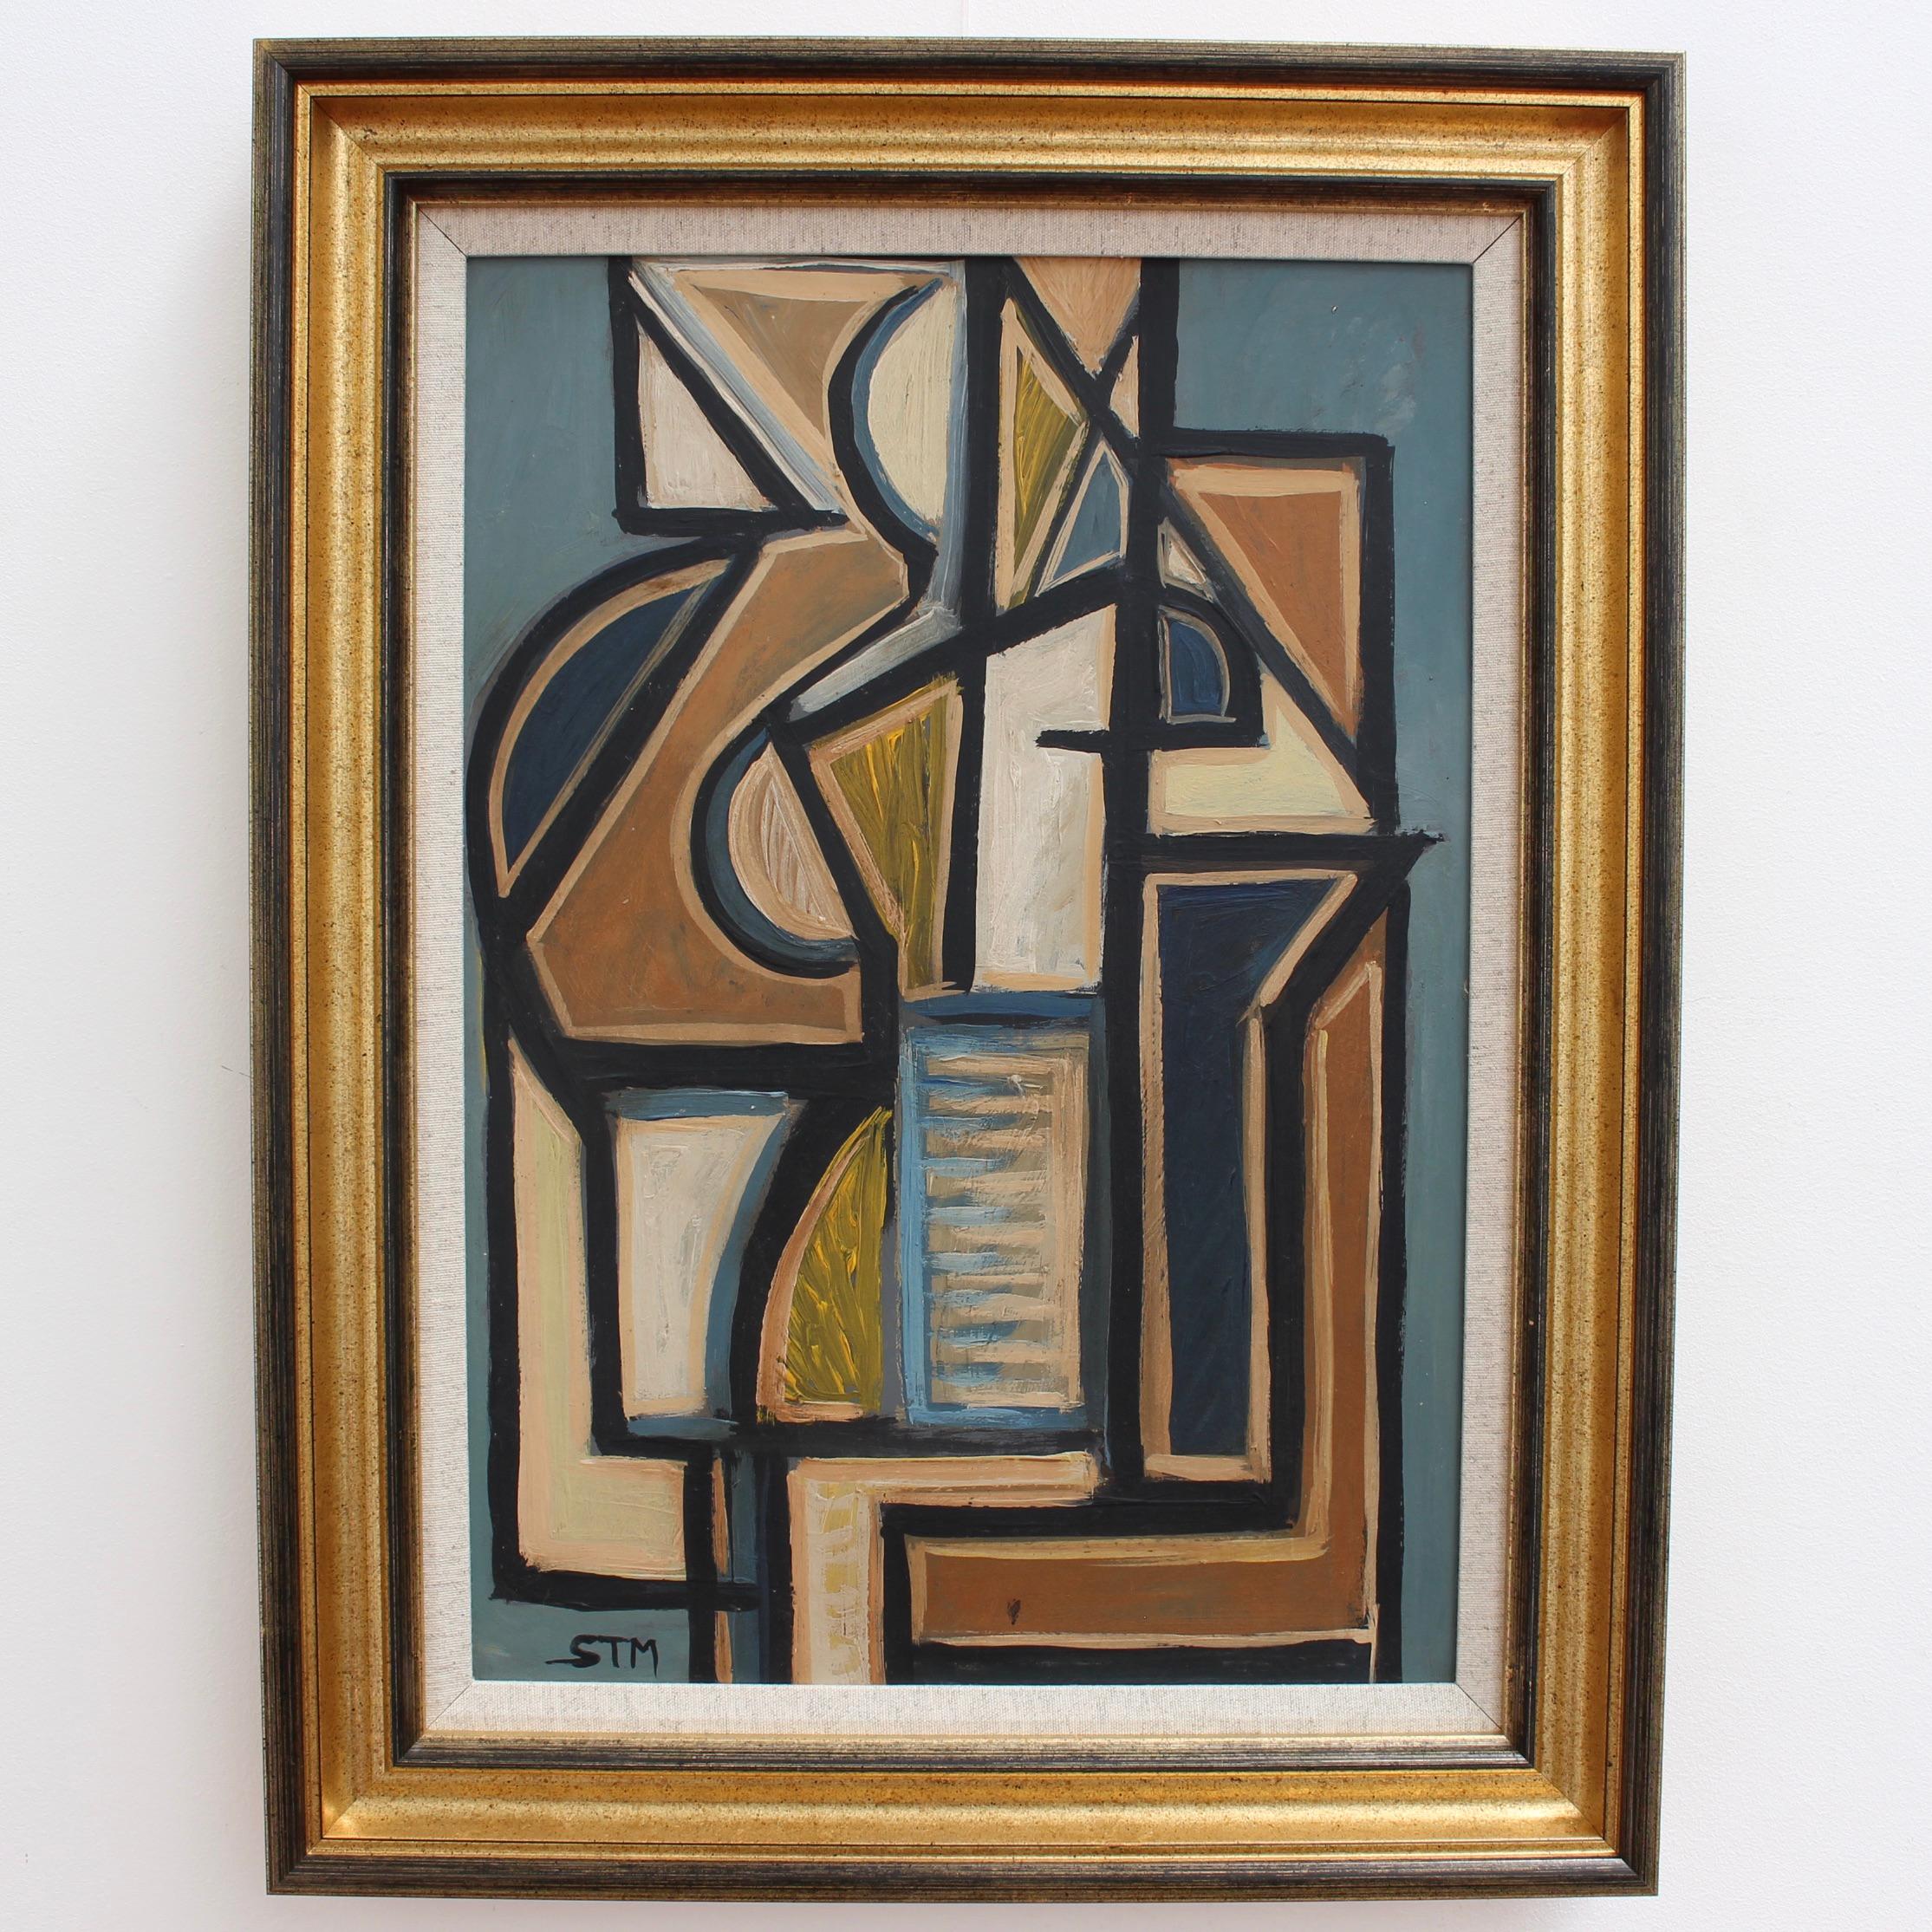 Cubist Composition in Colour - Painting by STM